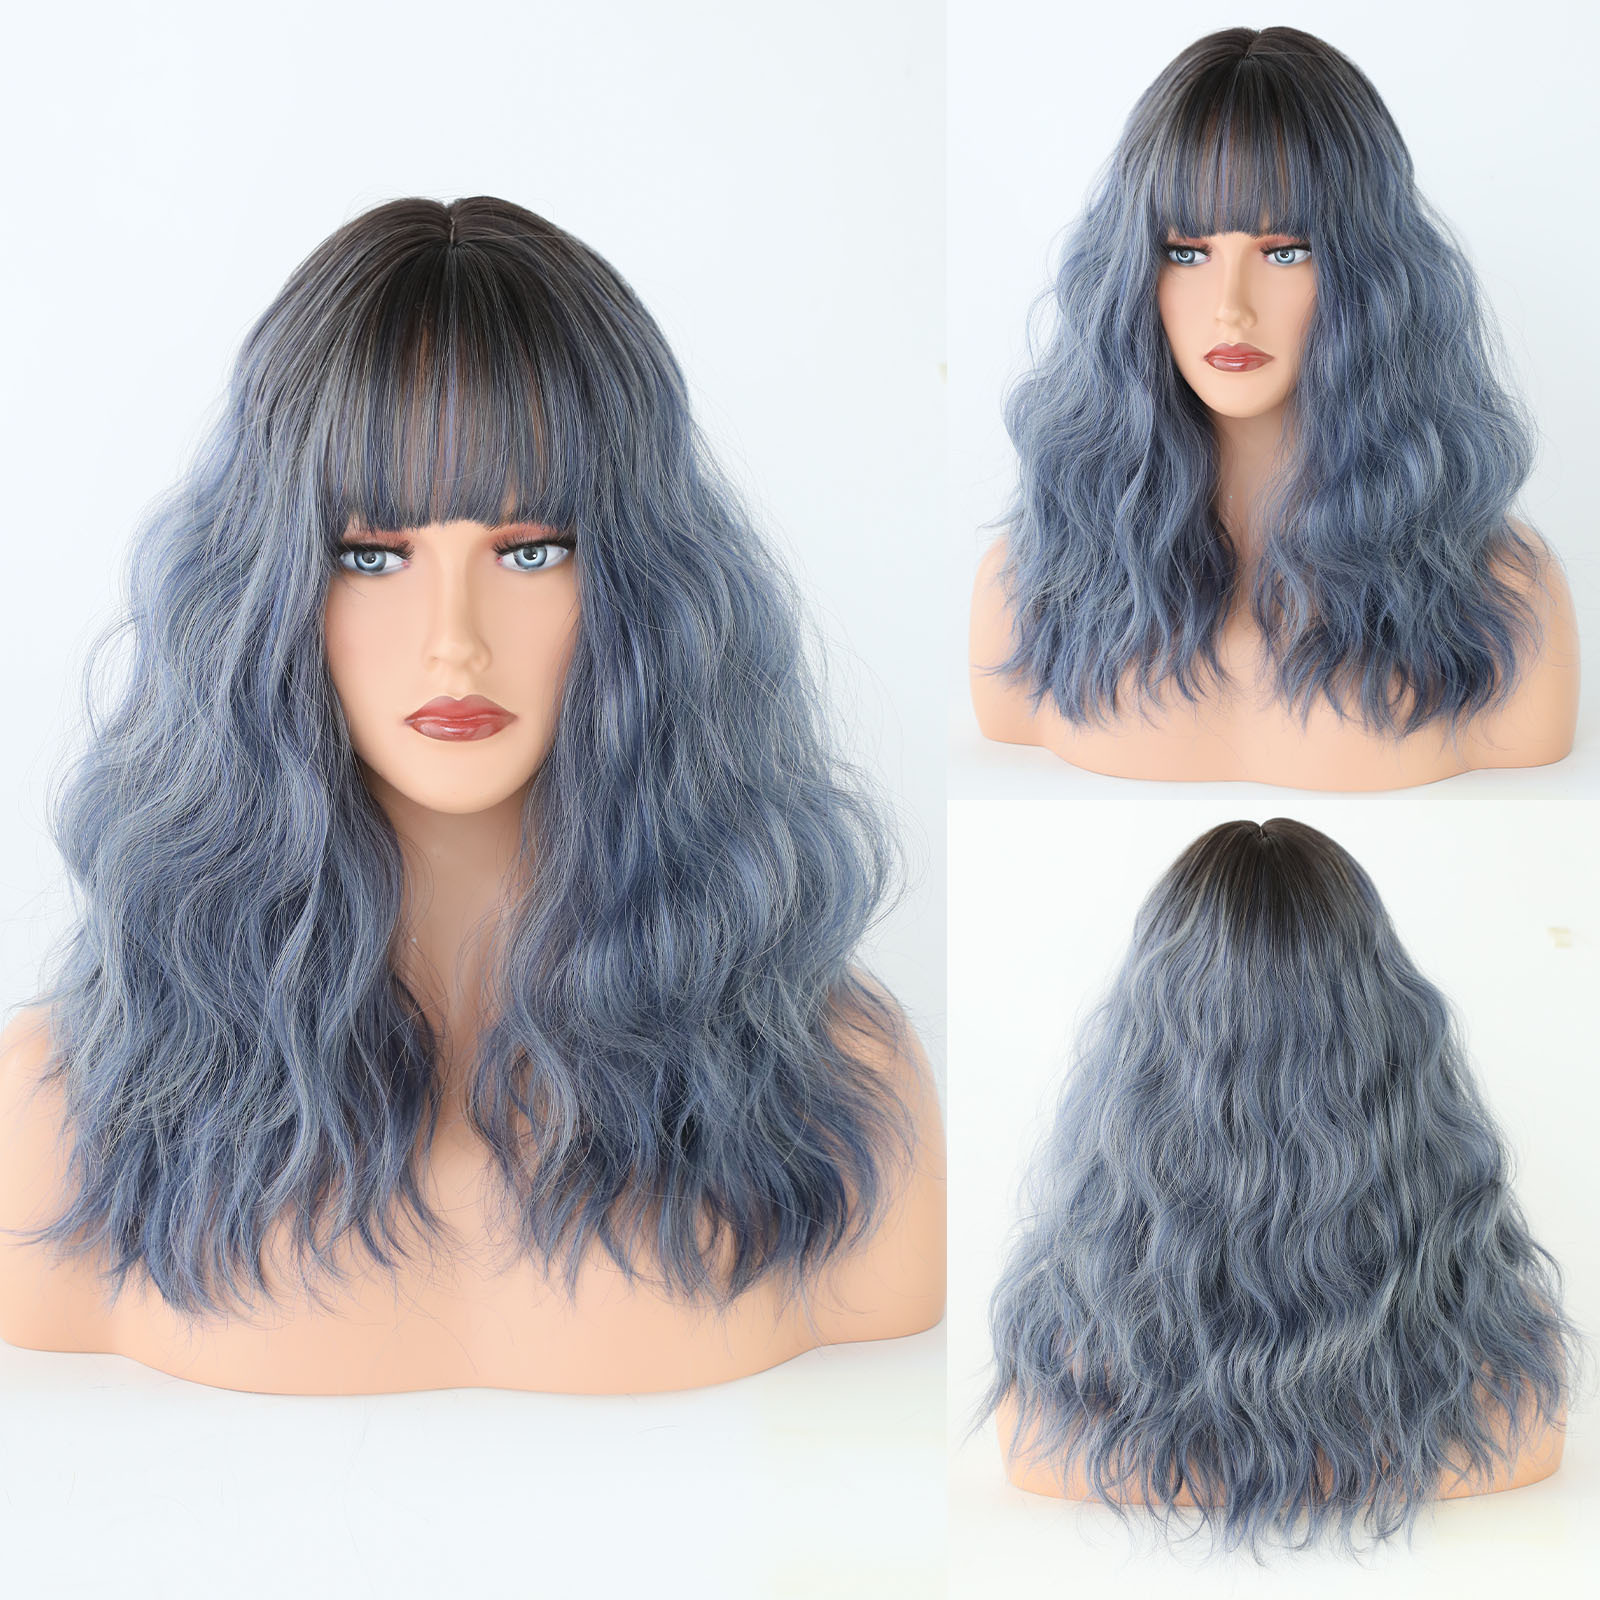 A synthetic wig featuring female haze blue wavy medium-length curly hair, offering a stylish and effortless design for a fashionable look